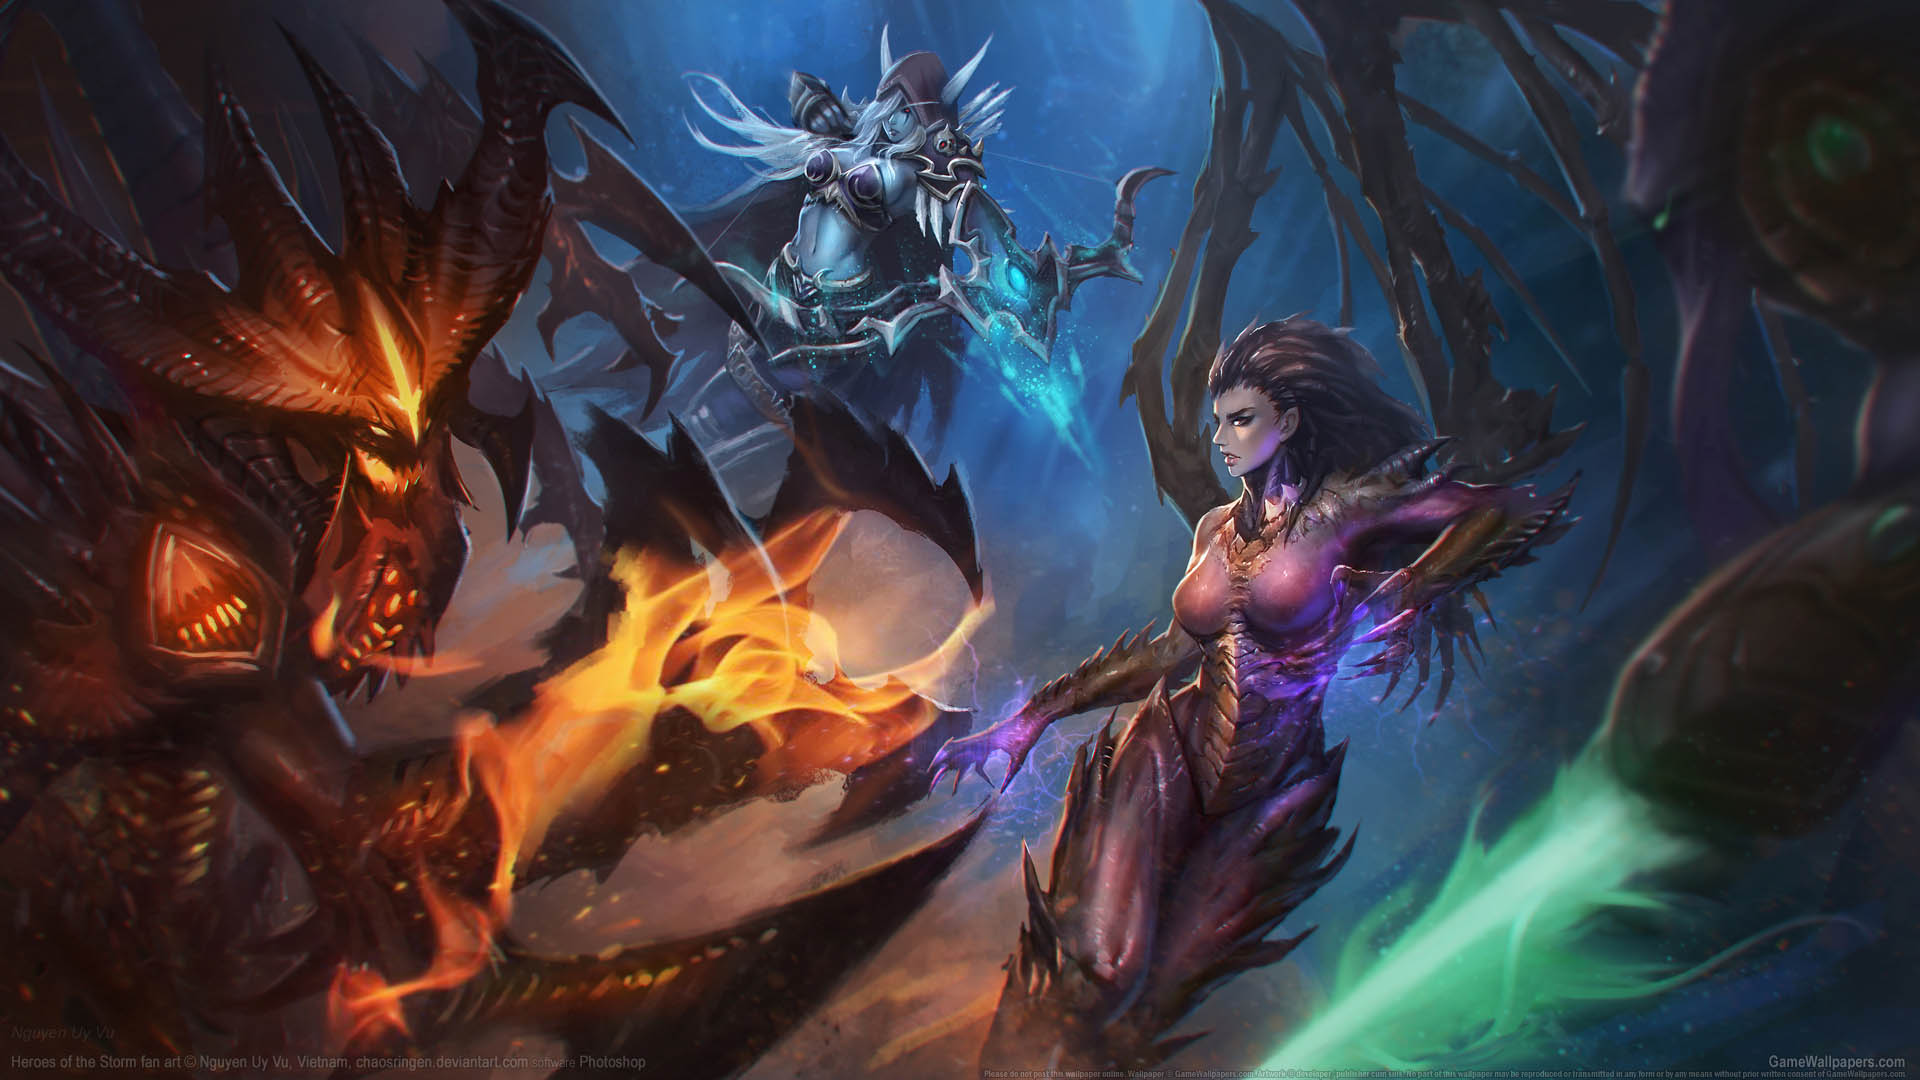 heroes of the storm wallpaper 1920x1080,action adventure game,cg artwork,demon,fictional character,dragon